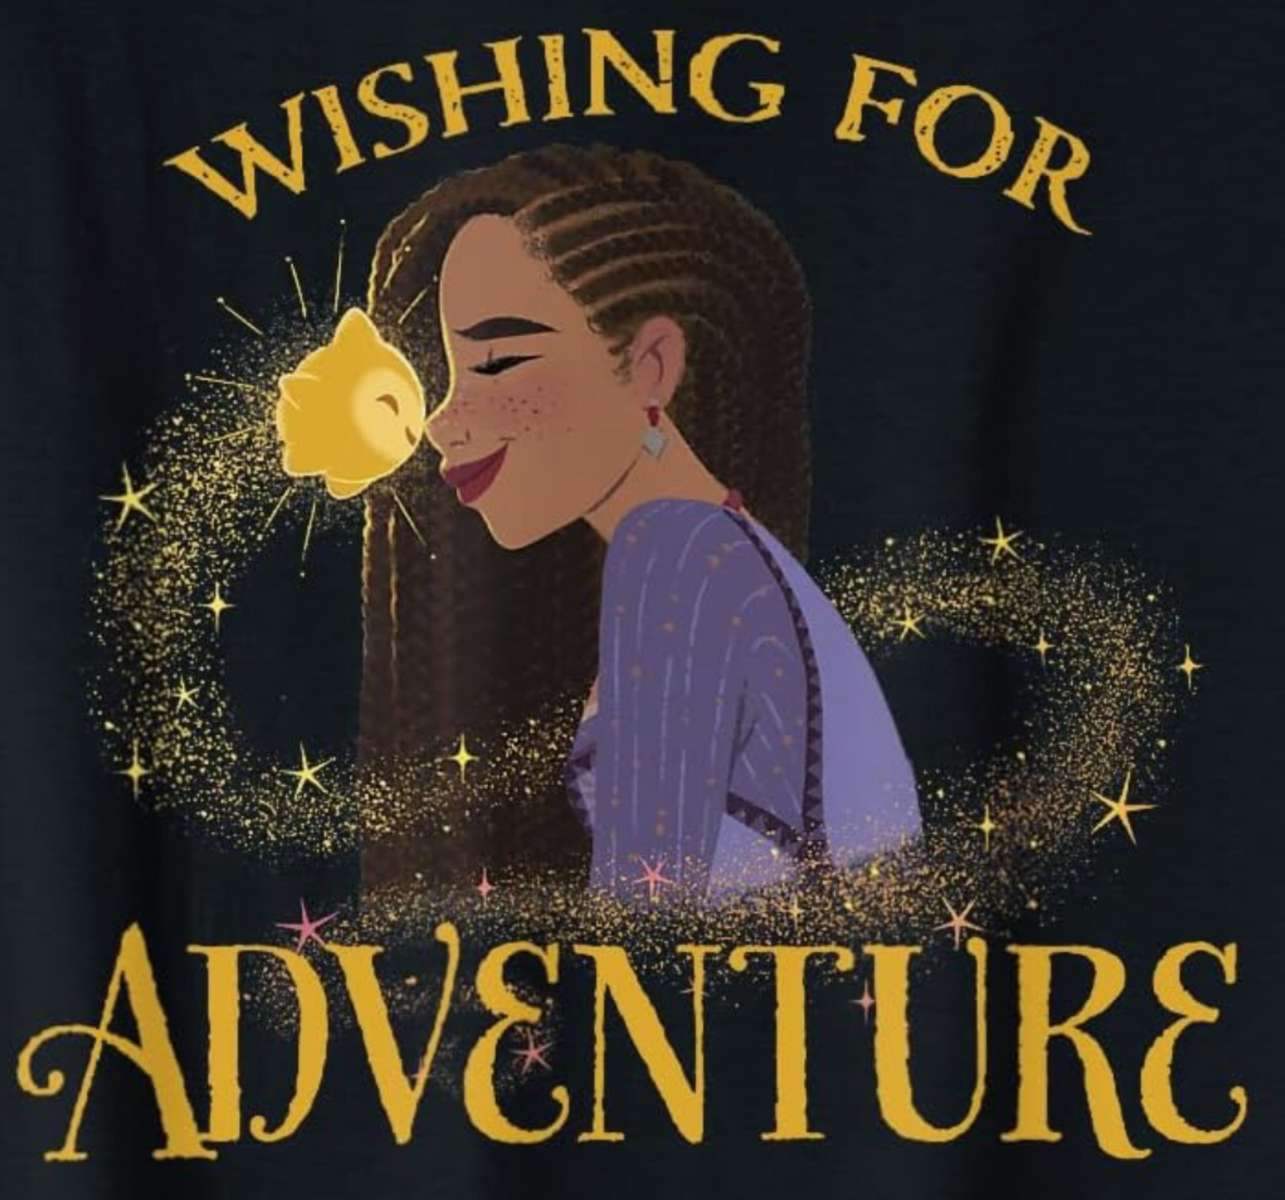 Asha și Star Wishing For Adventure Magical Duo jigsaw puzzle online